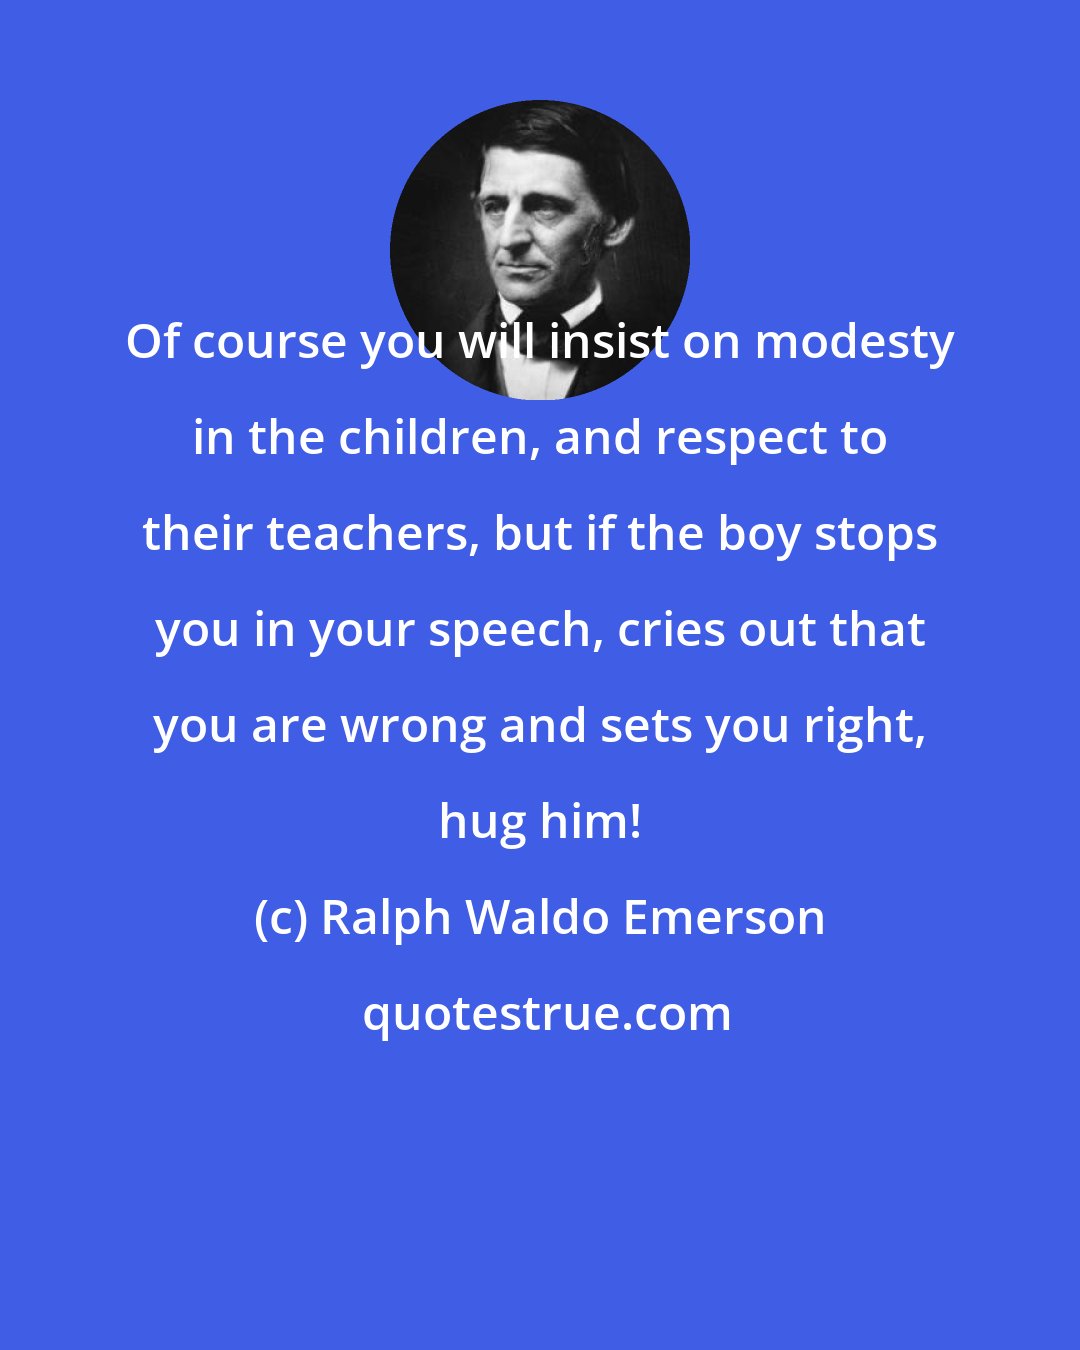 Ralph Waldo Emerson: Of course you will insist on modesty in the children, and respect to their teachers, but if the boy stops you in your speech, cries out that you are wrong and sets you right, hug him!